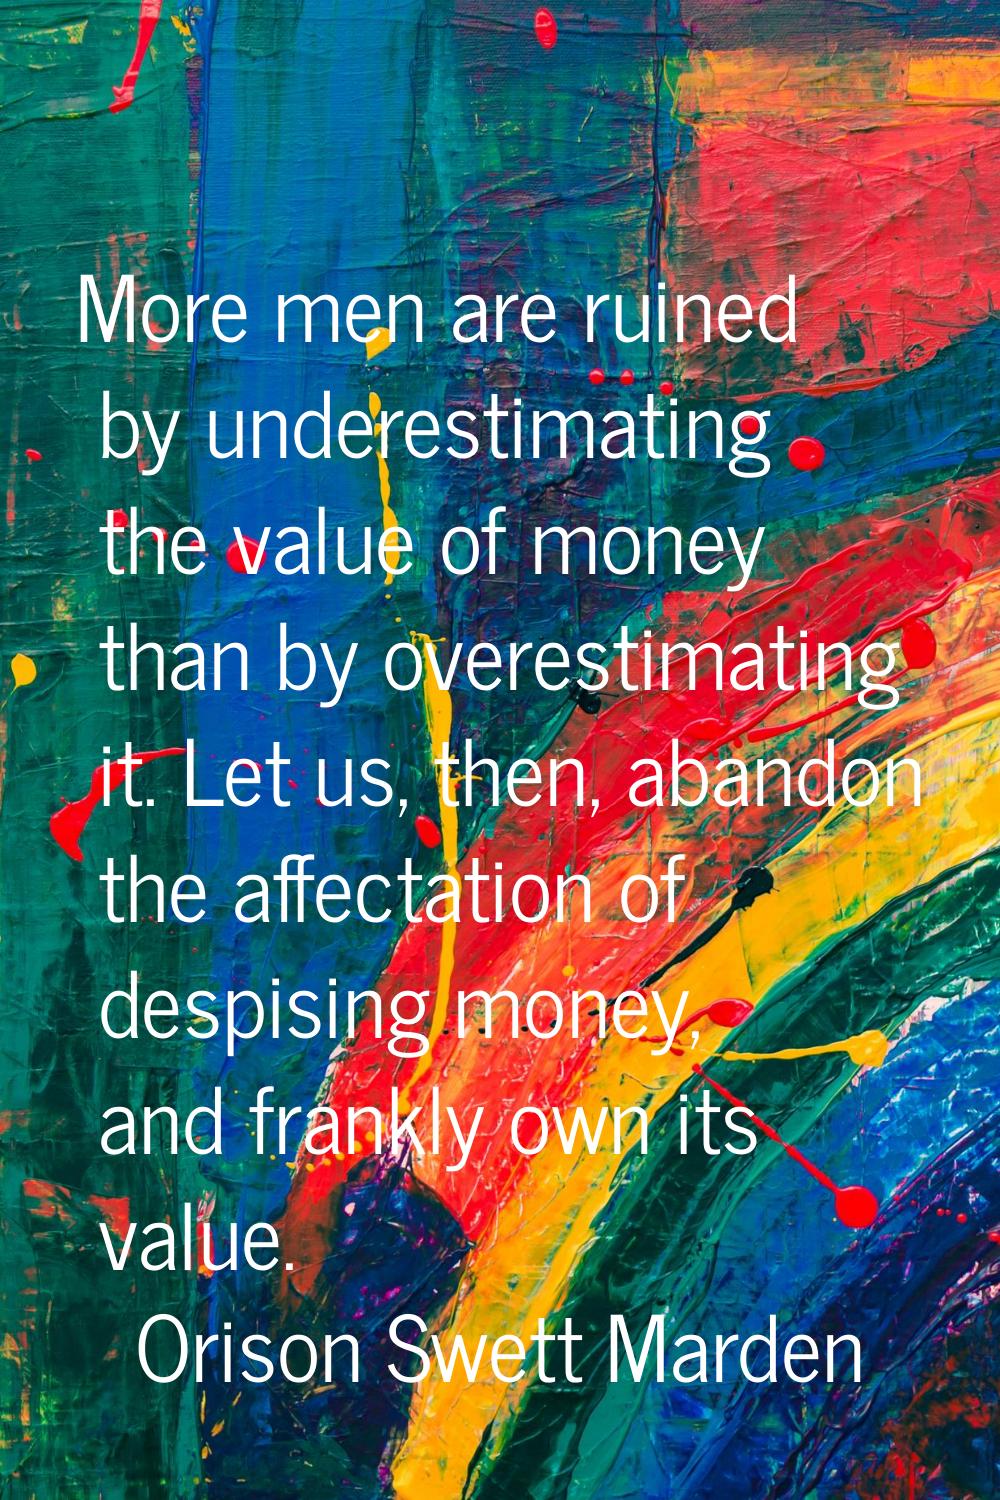 More men are ruined by underestimating the value of money than by overestimating it. Let us, then, 